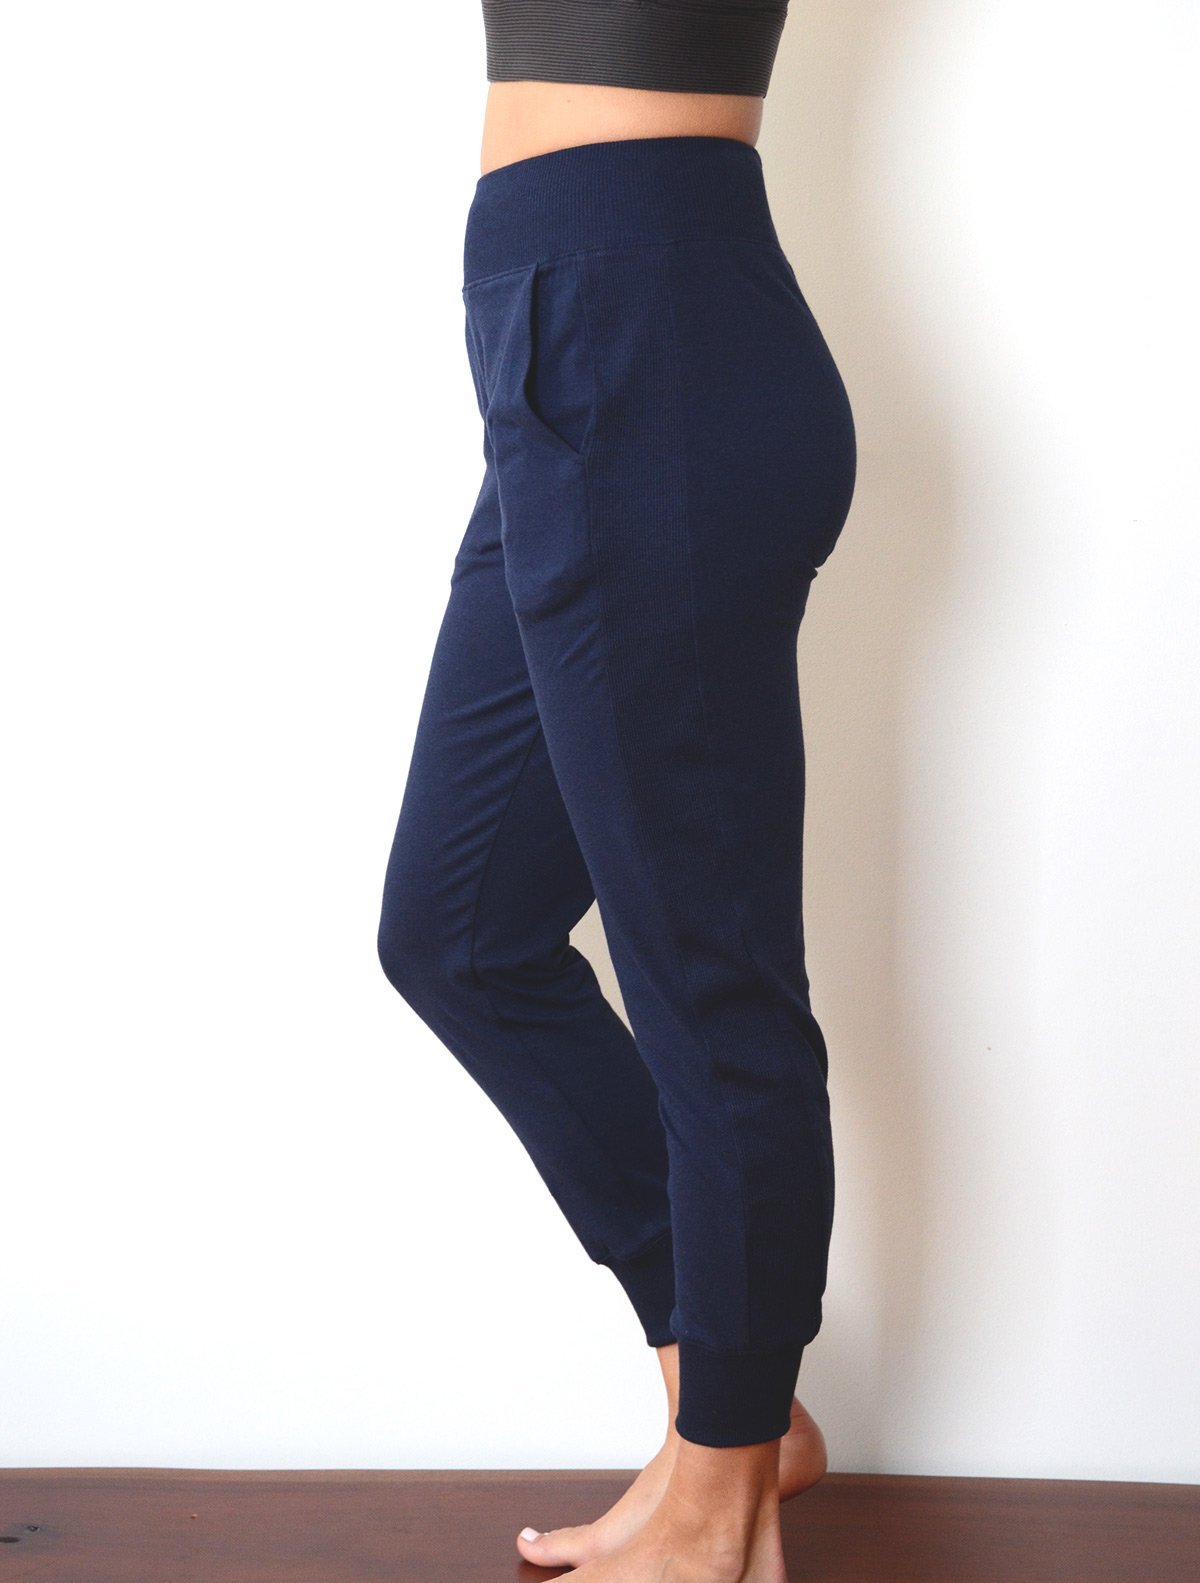 side view of model wearing simulacra's navy blue women' cropped joggers with pockets version 2.0 